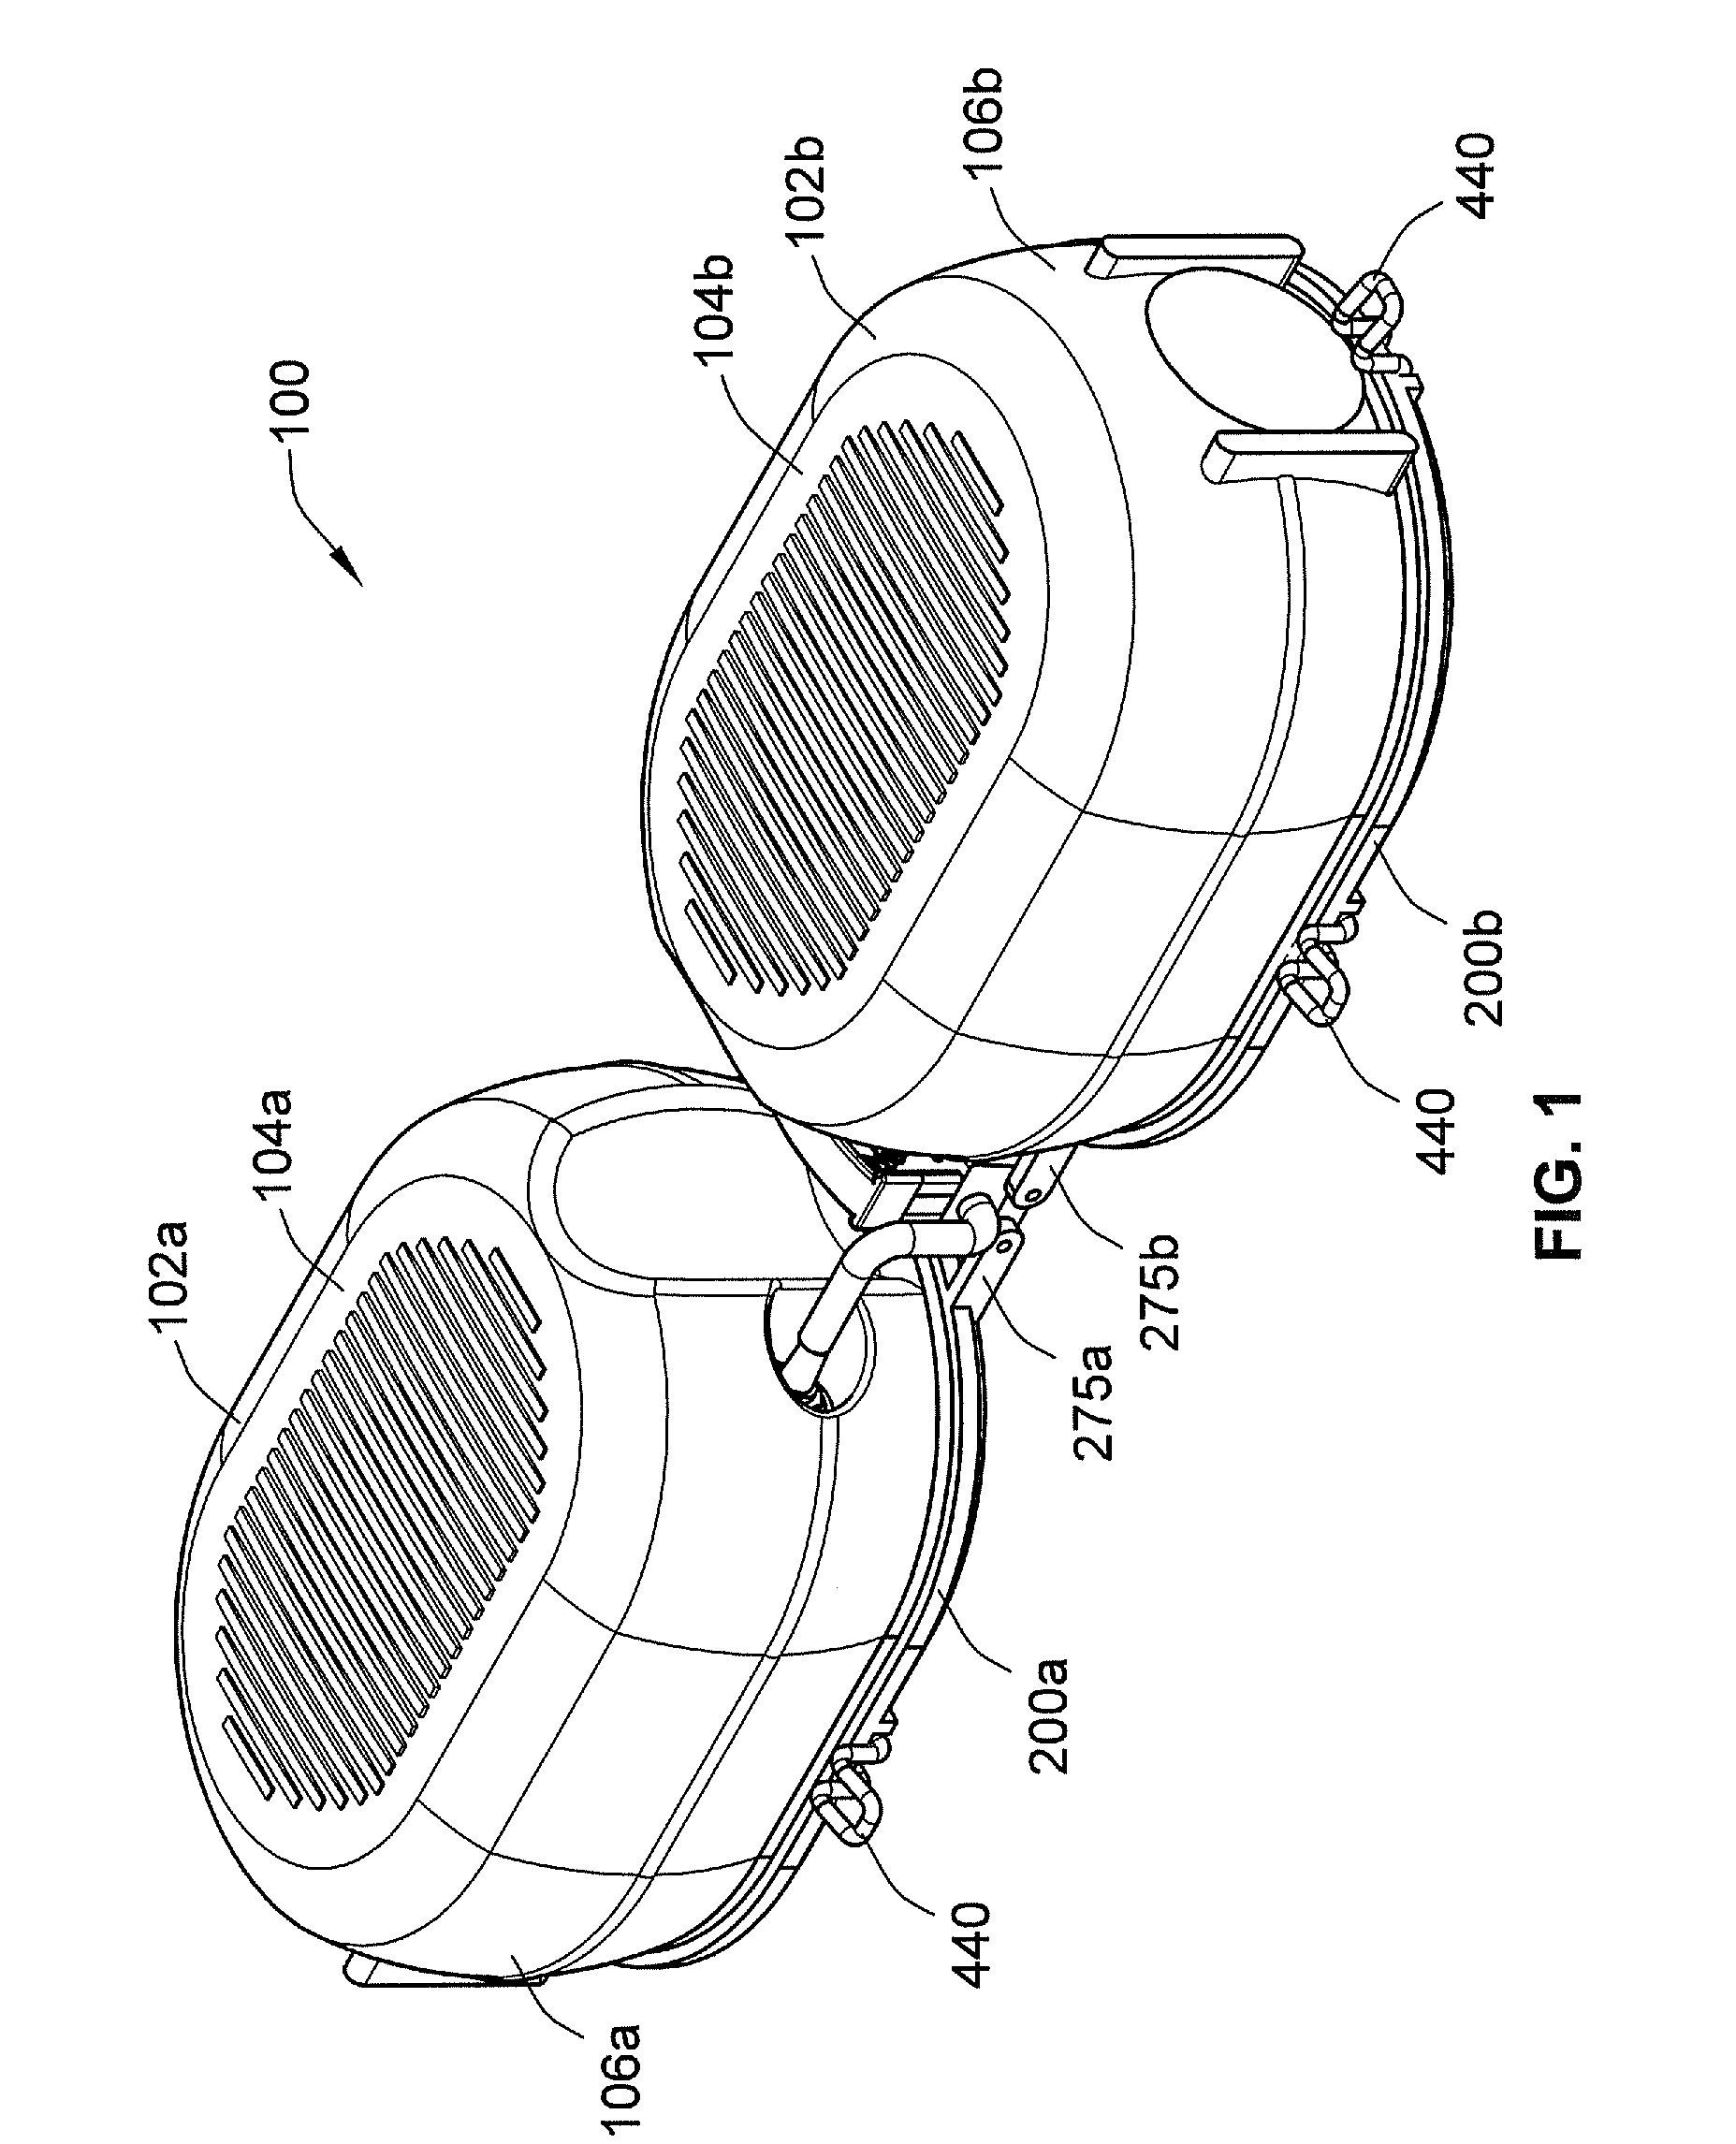 Inflatable exercise apparatus